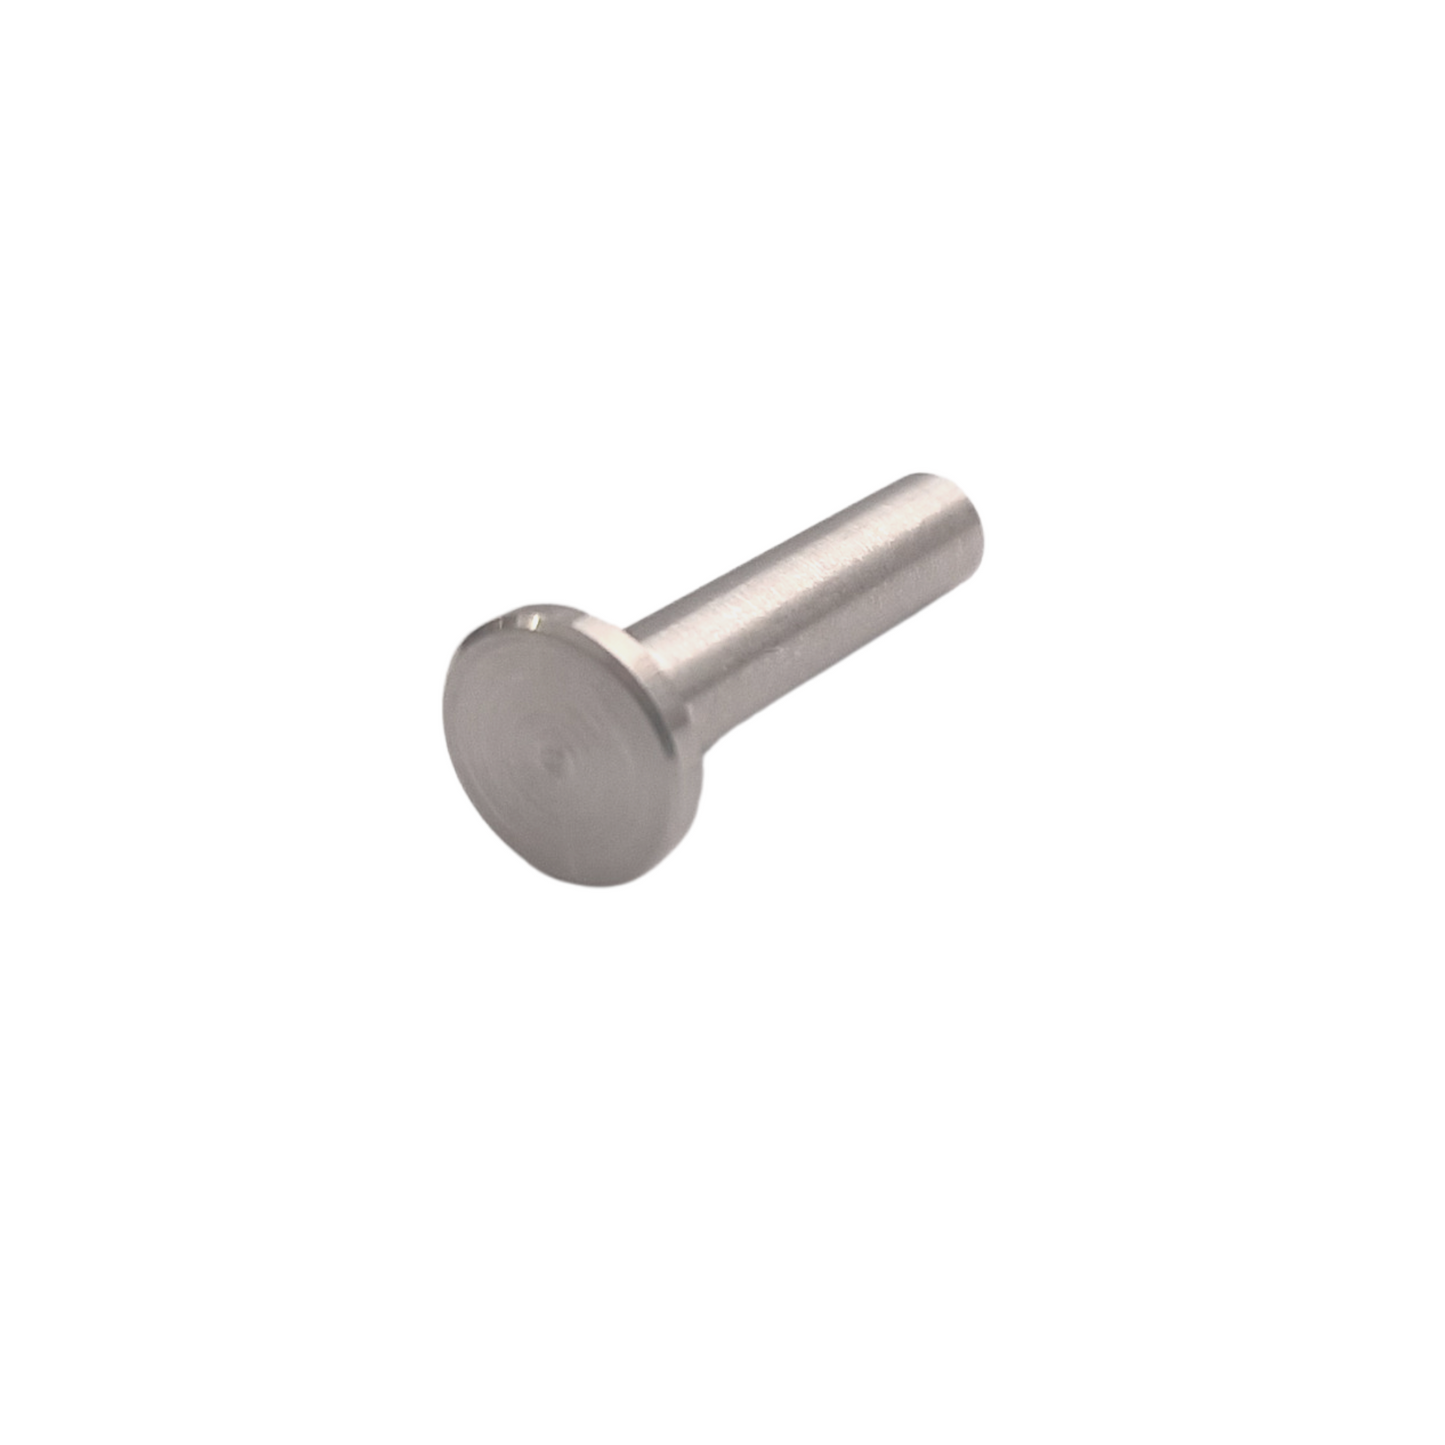 Slimline Swage Stopper for 4mm Cable